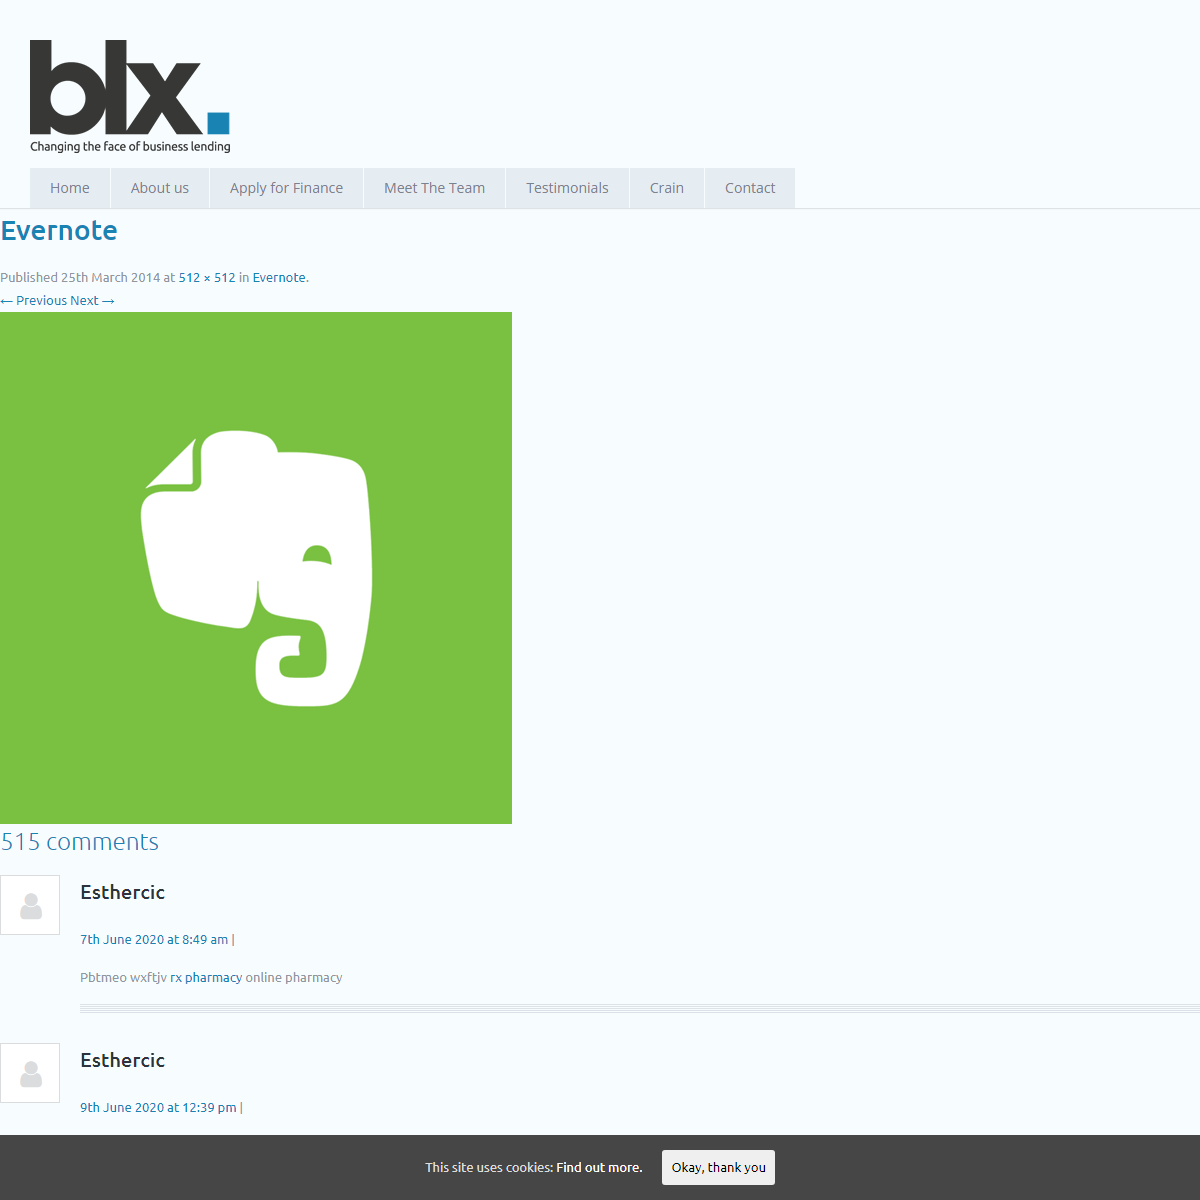 A complete backup of https://www.theblx.com/site/evernote/